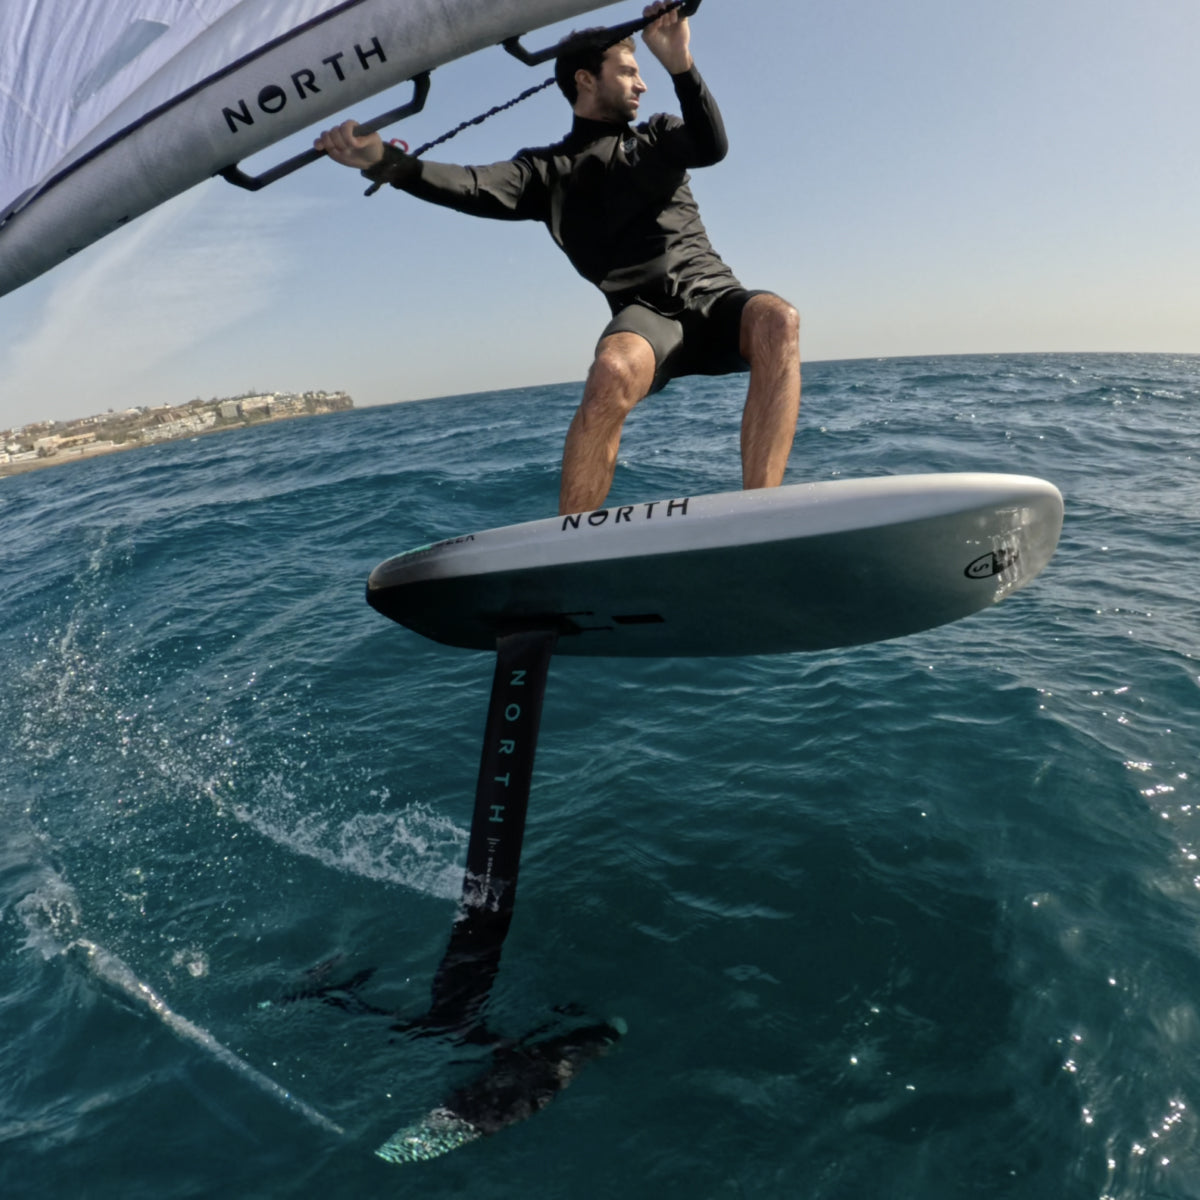 North Sonar MA v2 | Wing Foil Review